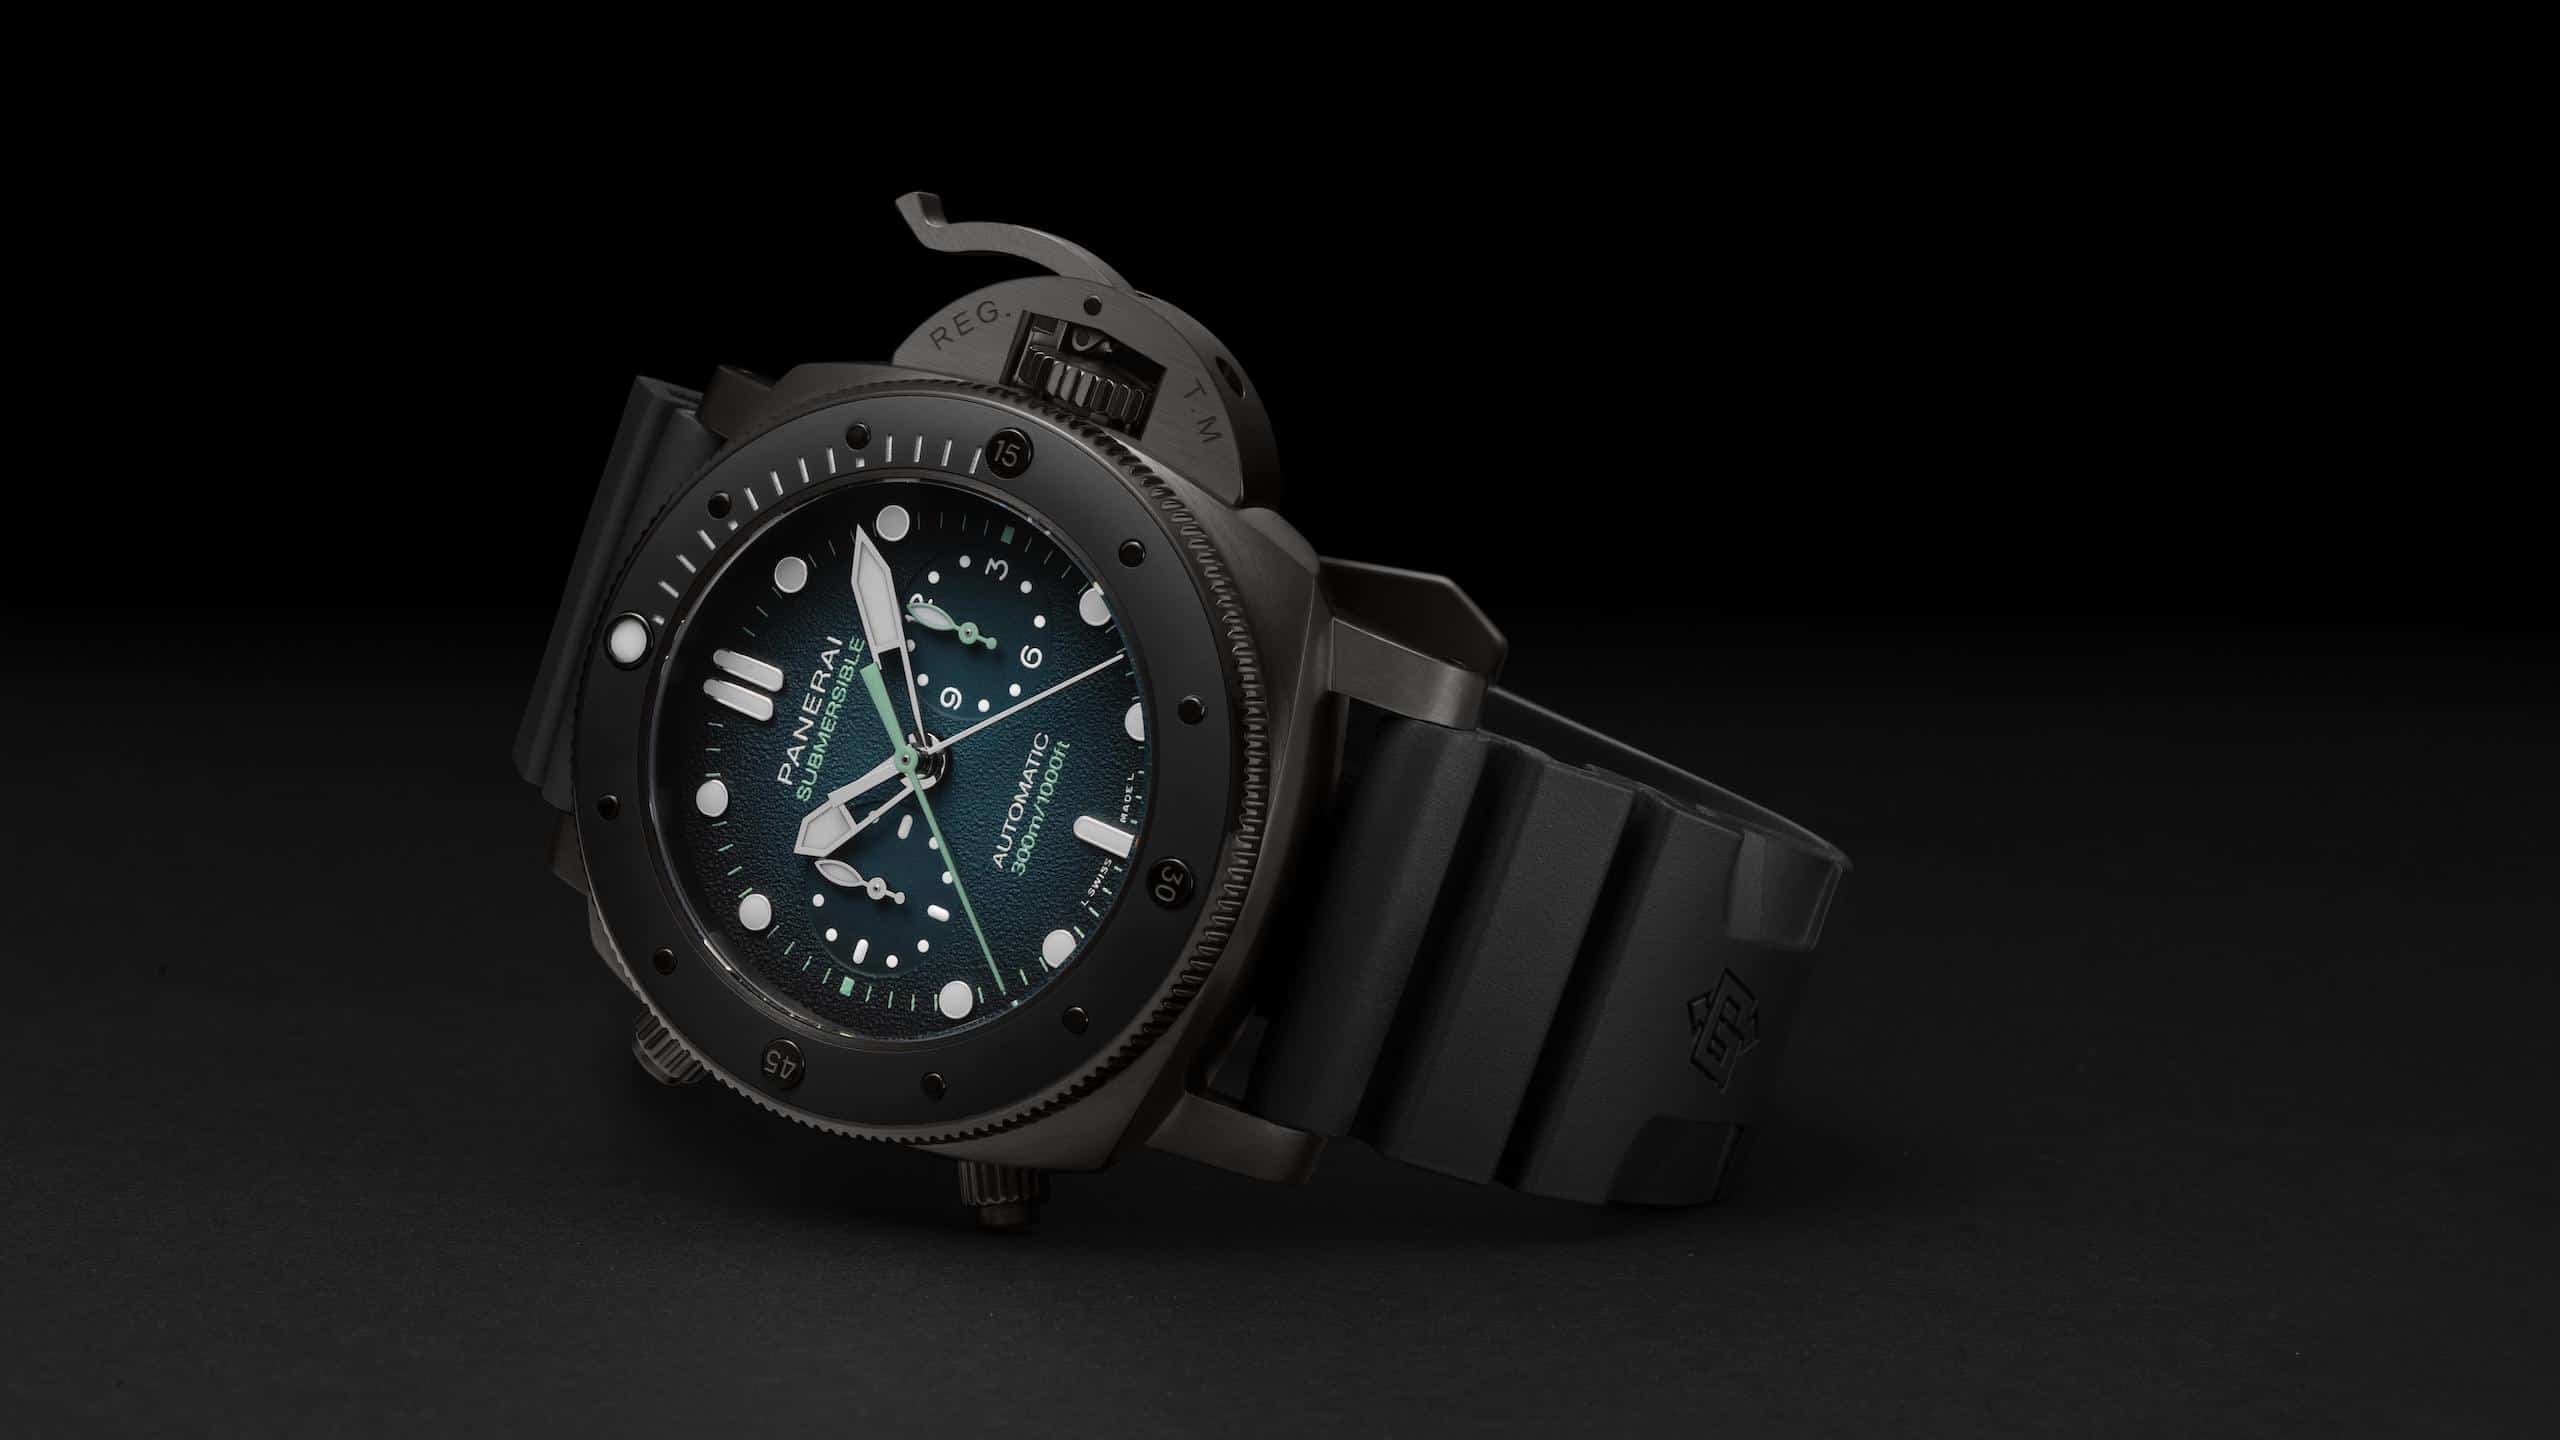 Freedive into Guillaume Néry’s world with the Panerai Submersible Chrono